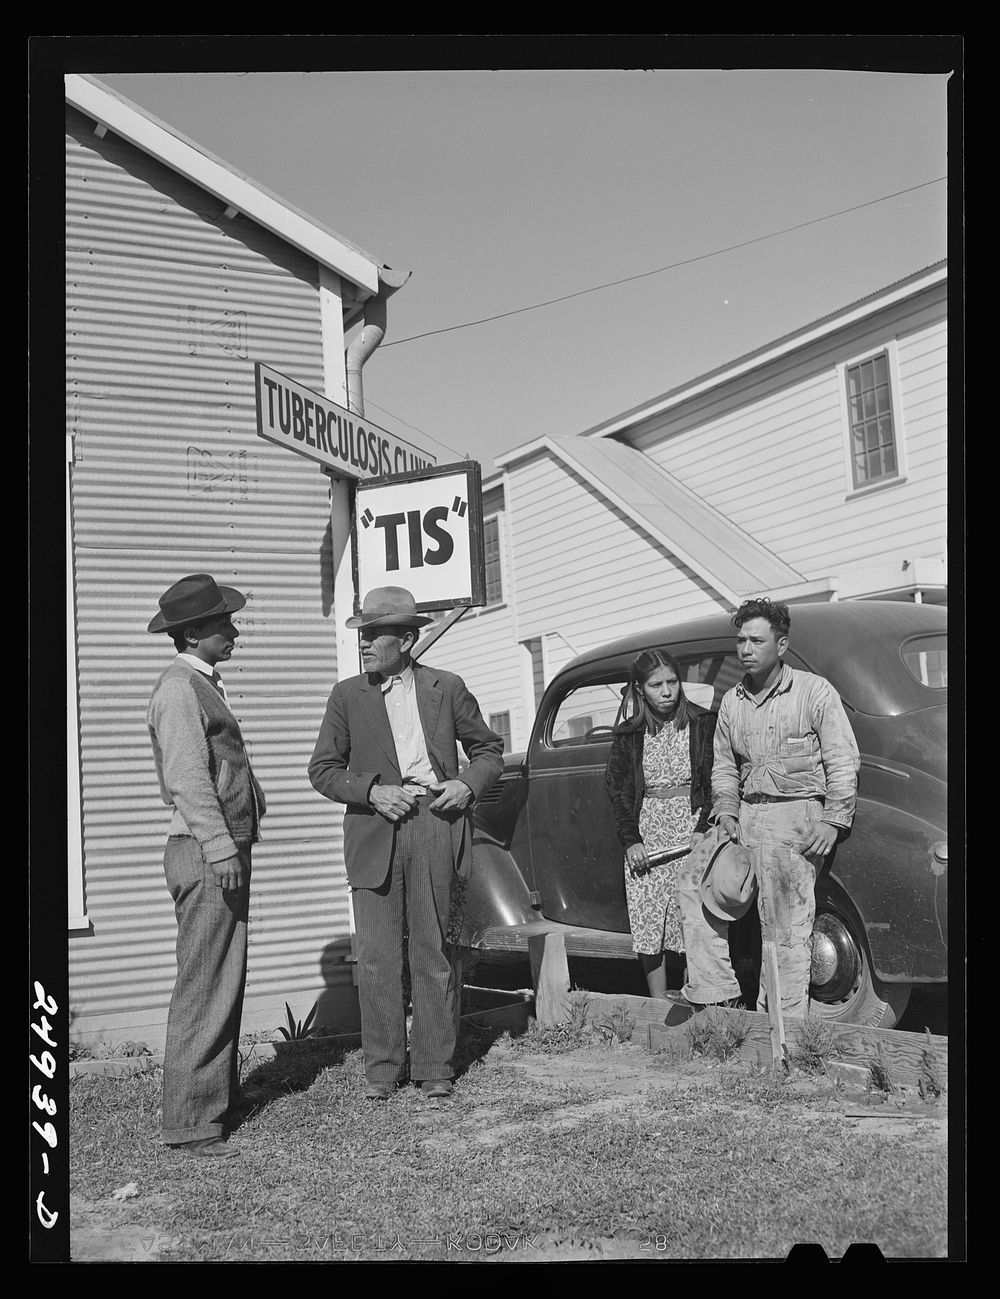 Corpus Christi, Texas. Privately supported tuberculosis clinic supervised by a doctor. Majority of the patients are Latin…